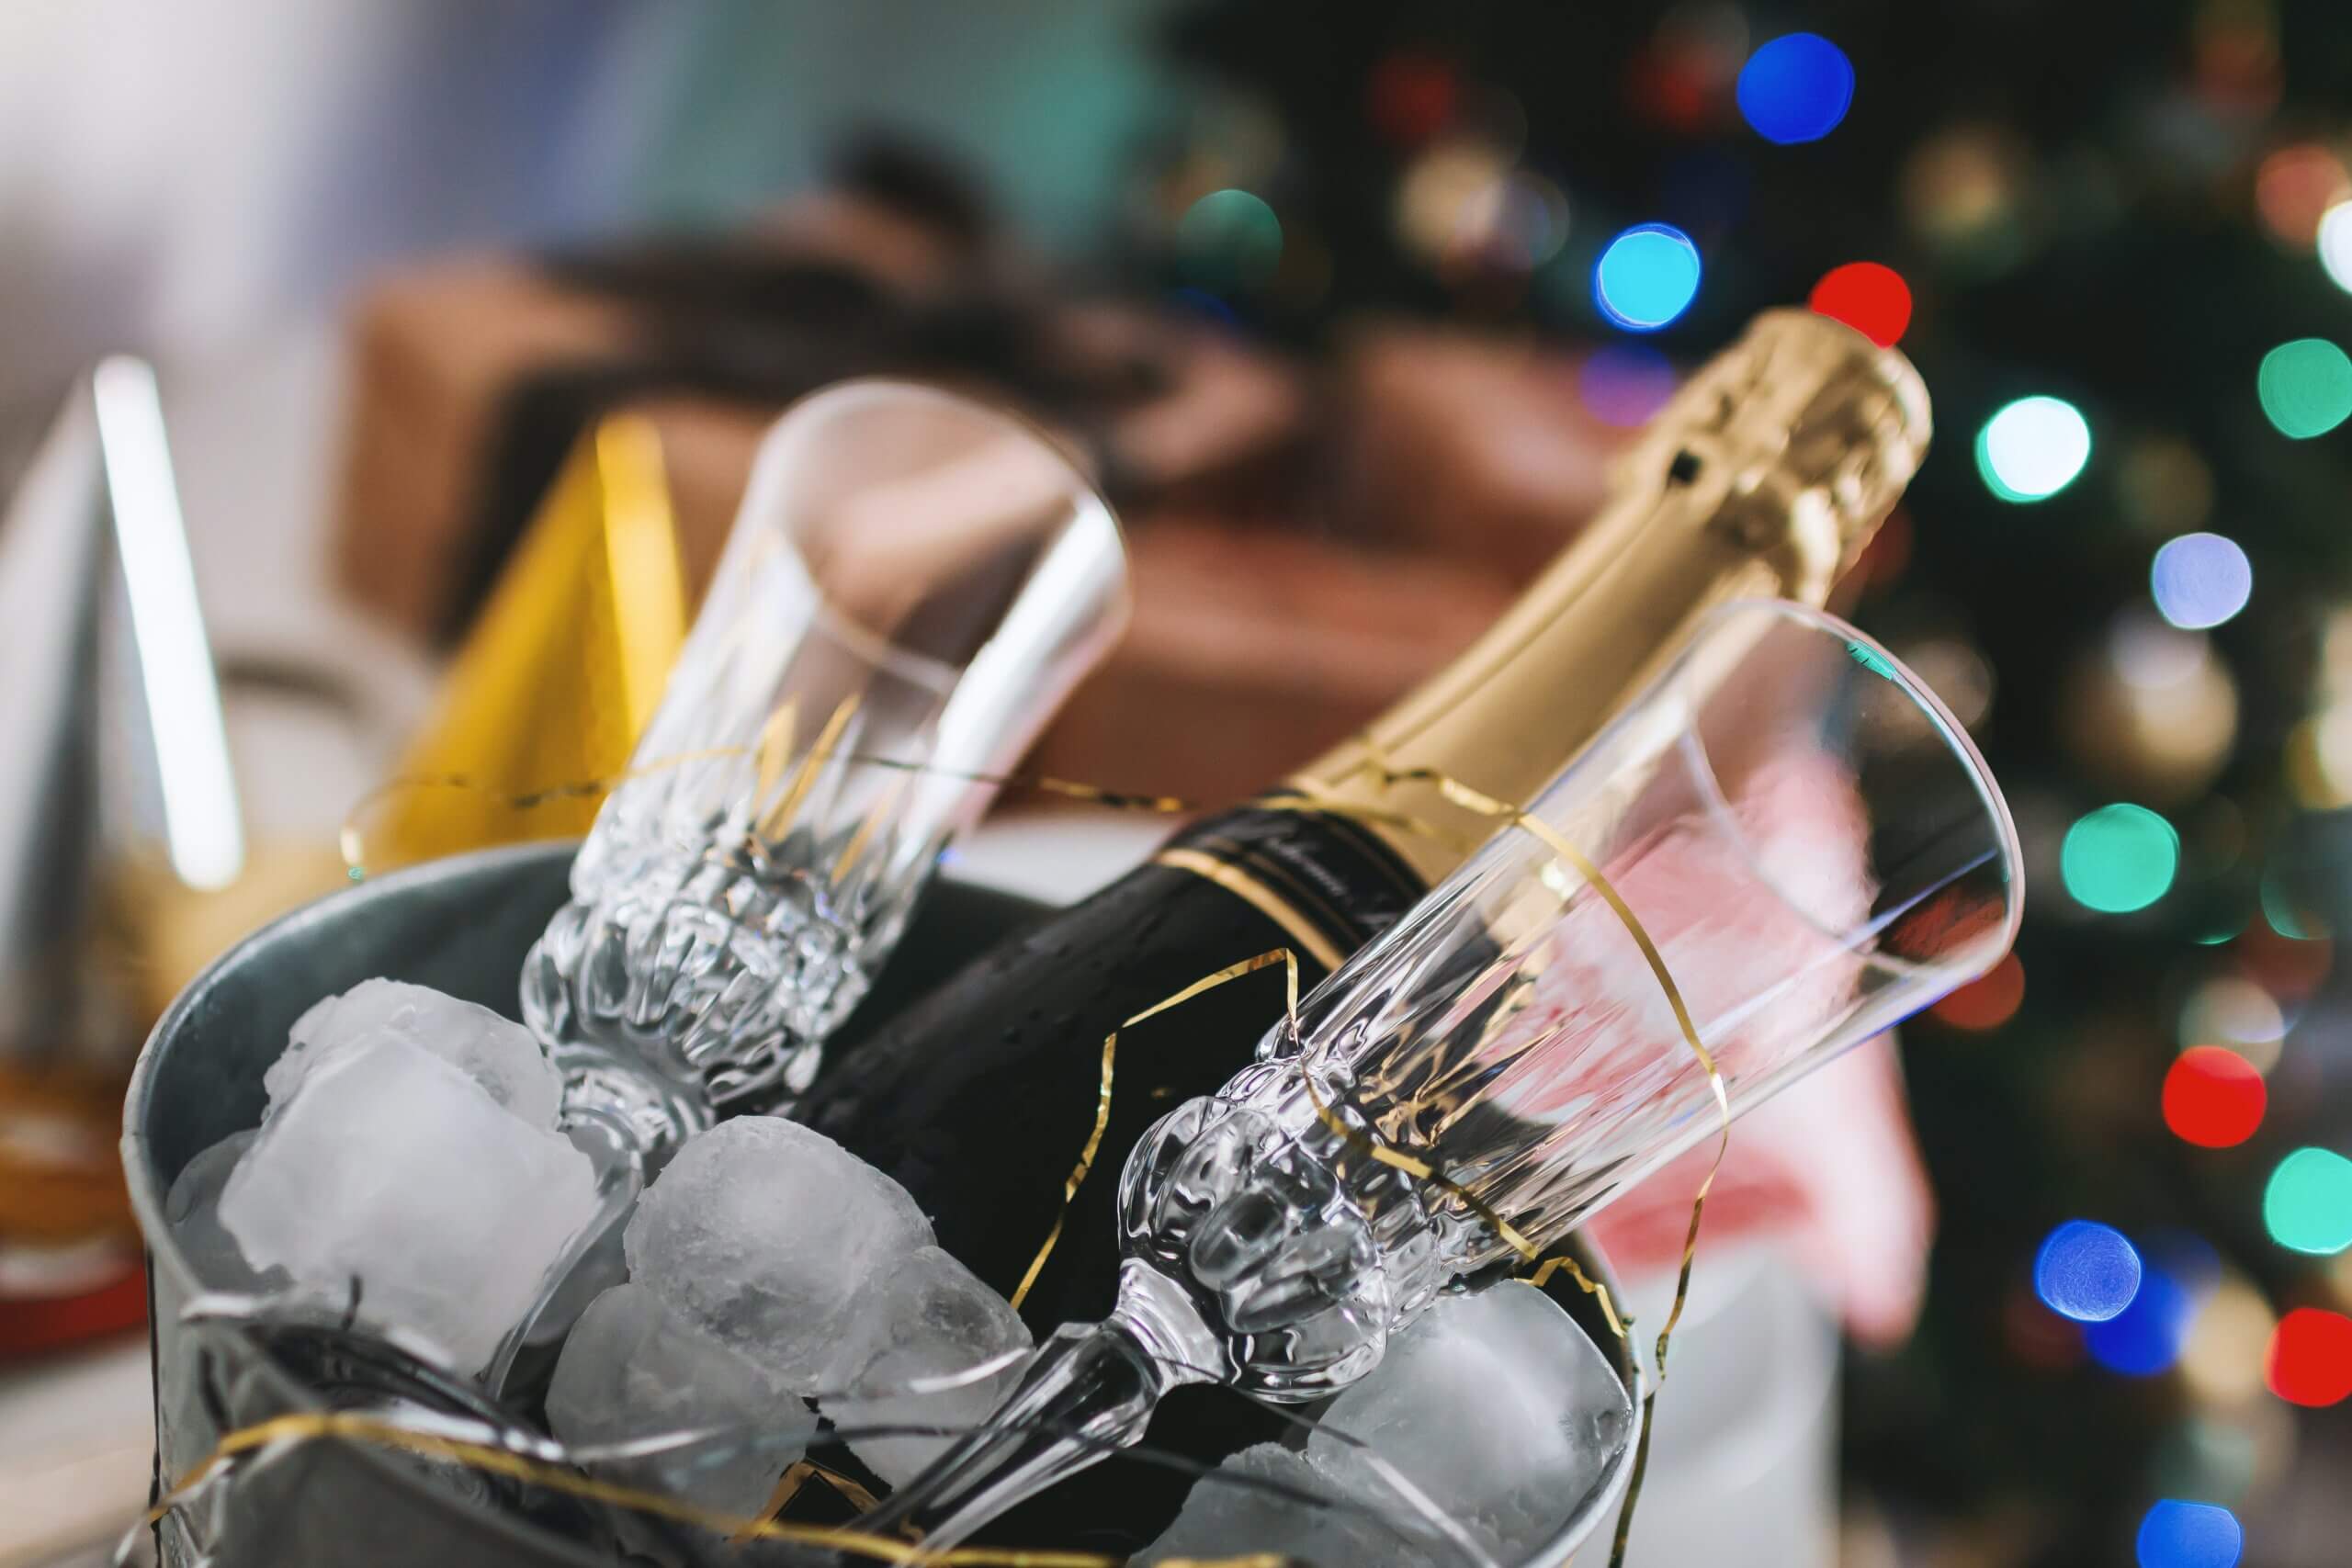 10 Things To Consider When Planning Your Company Holiday Party! - Picnic  People